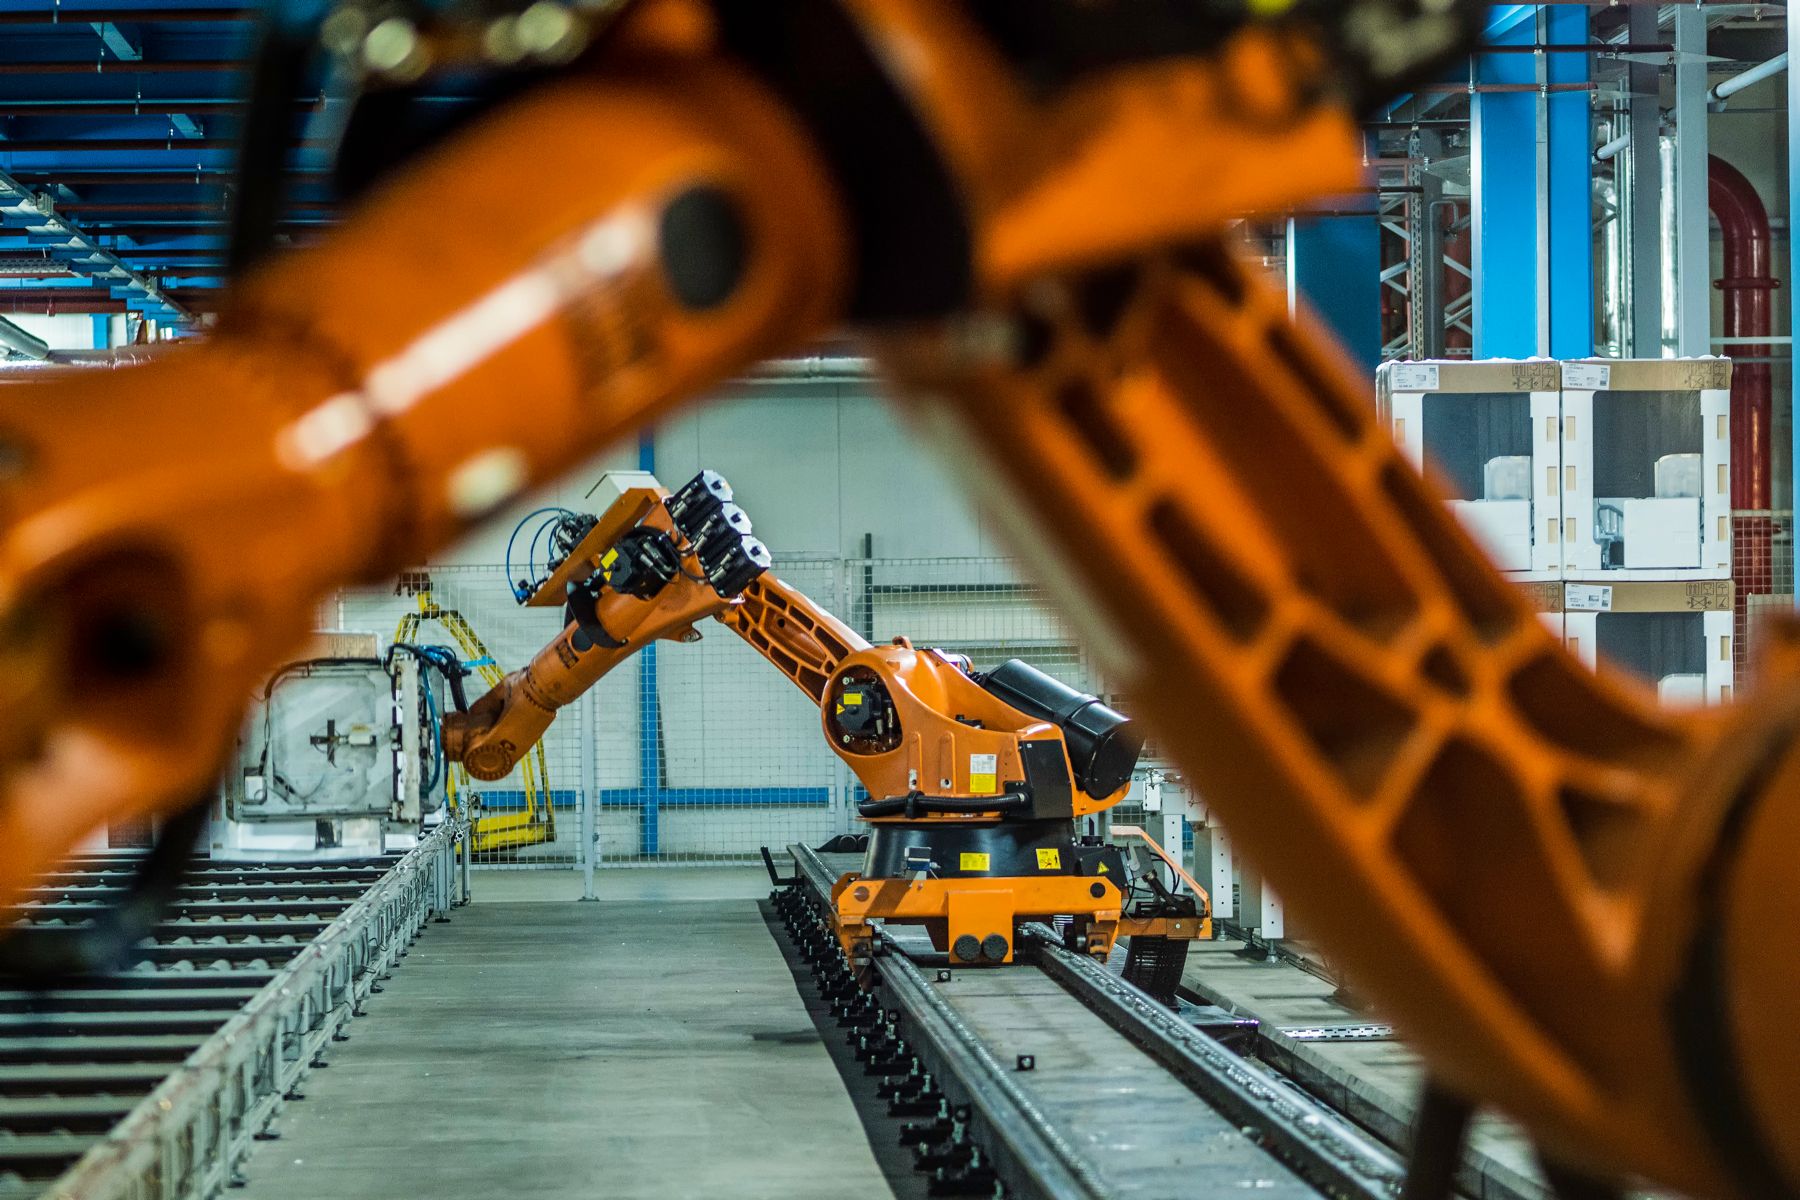 Overcoming Industry 4.0 Challenges for Truly Connected Manufacturing